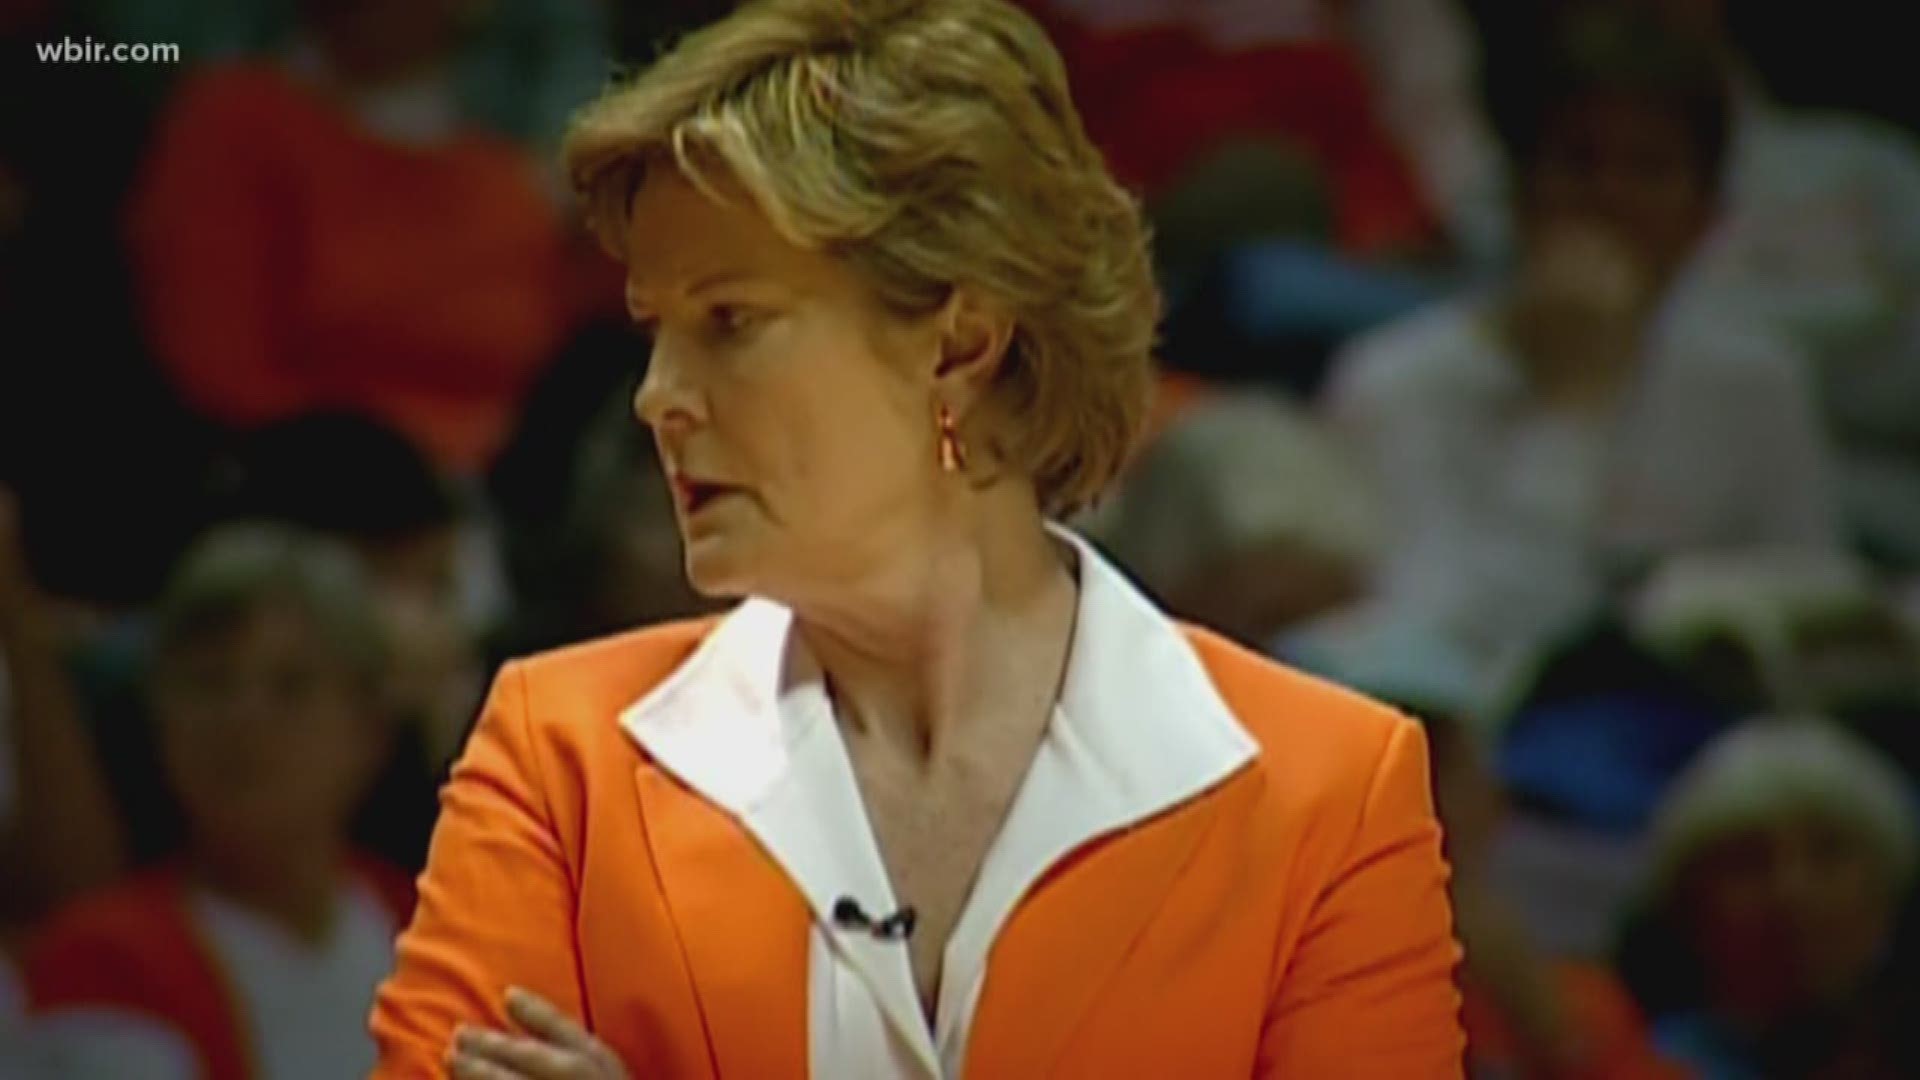 Today marks two years since the death of legendary Lady Vols Head Coach Pat Summitt.